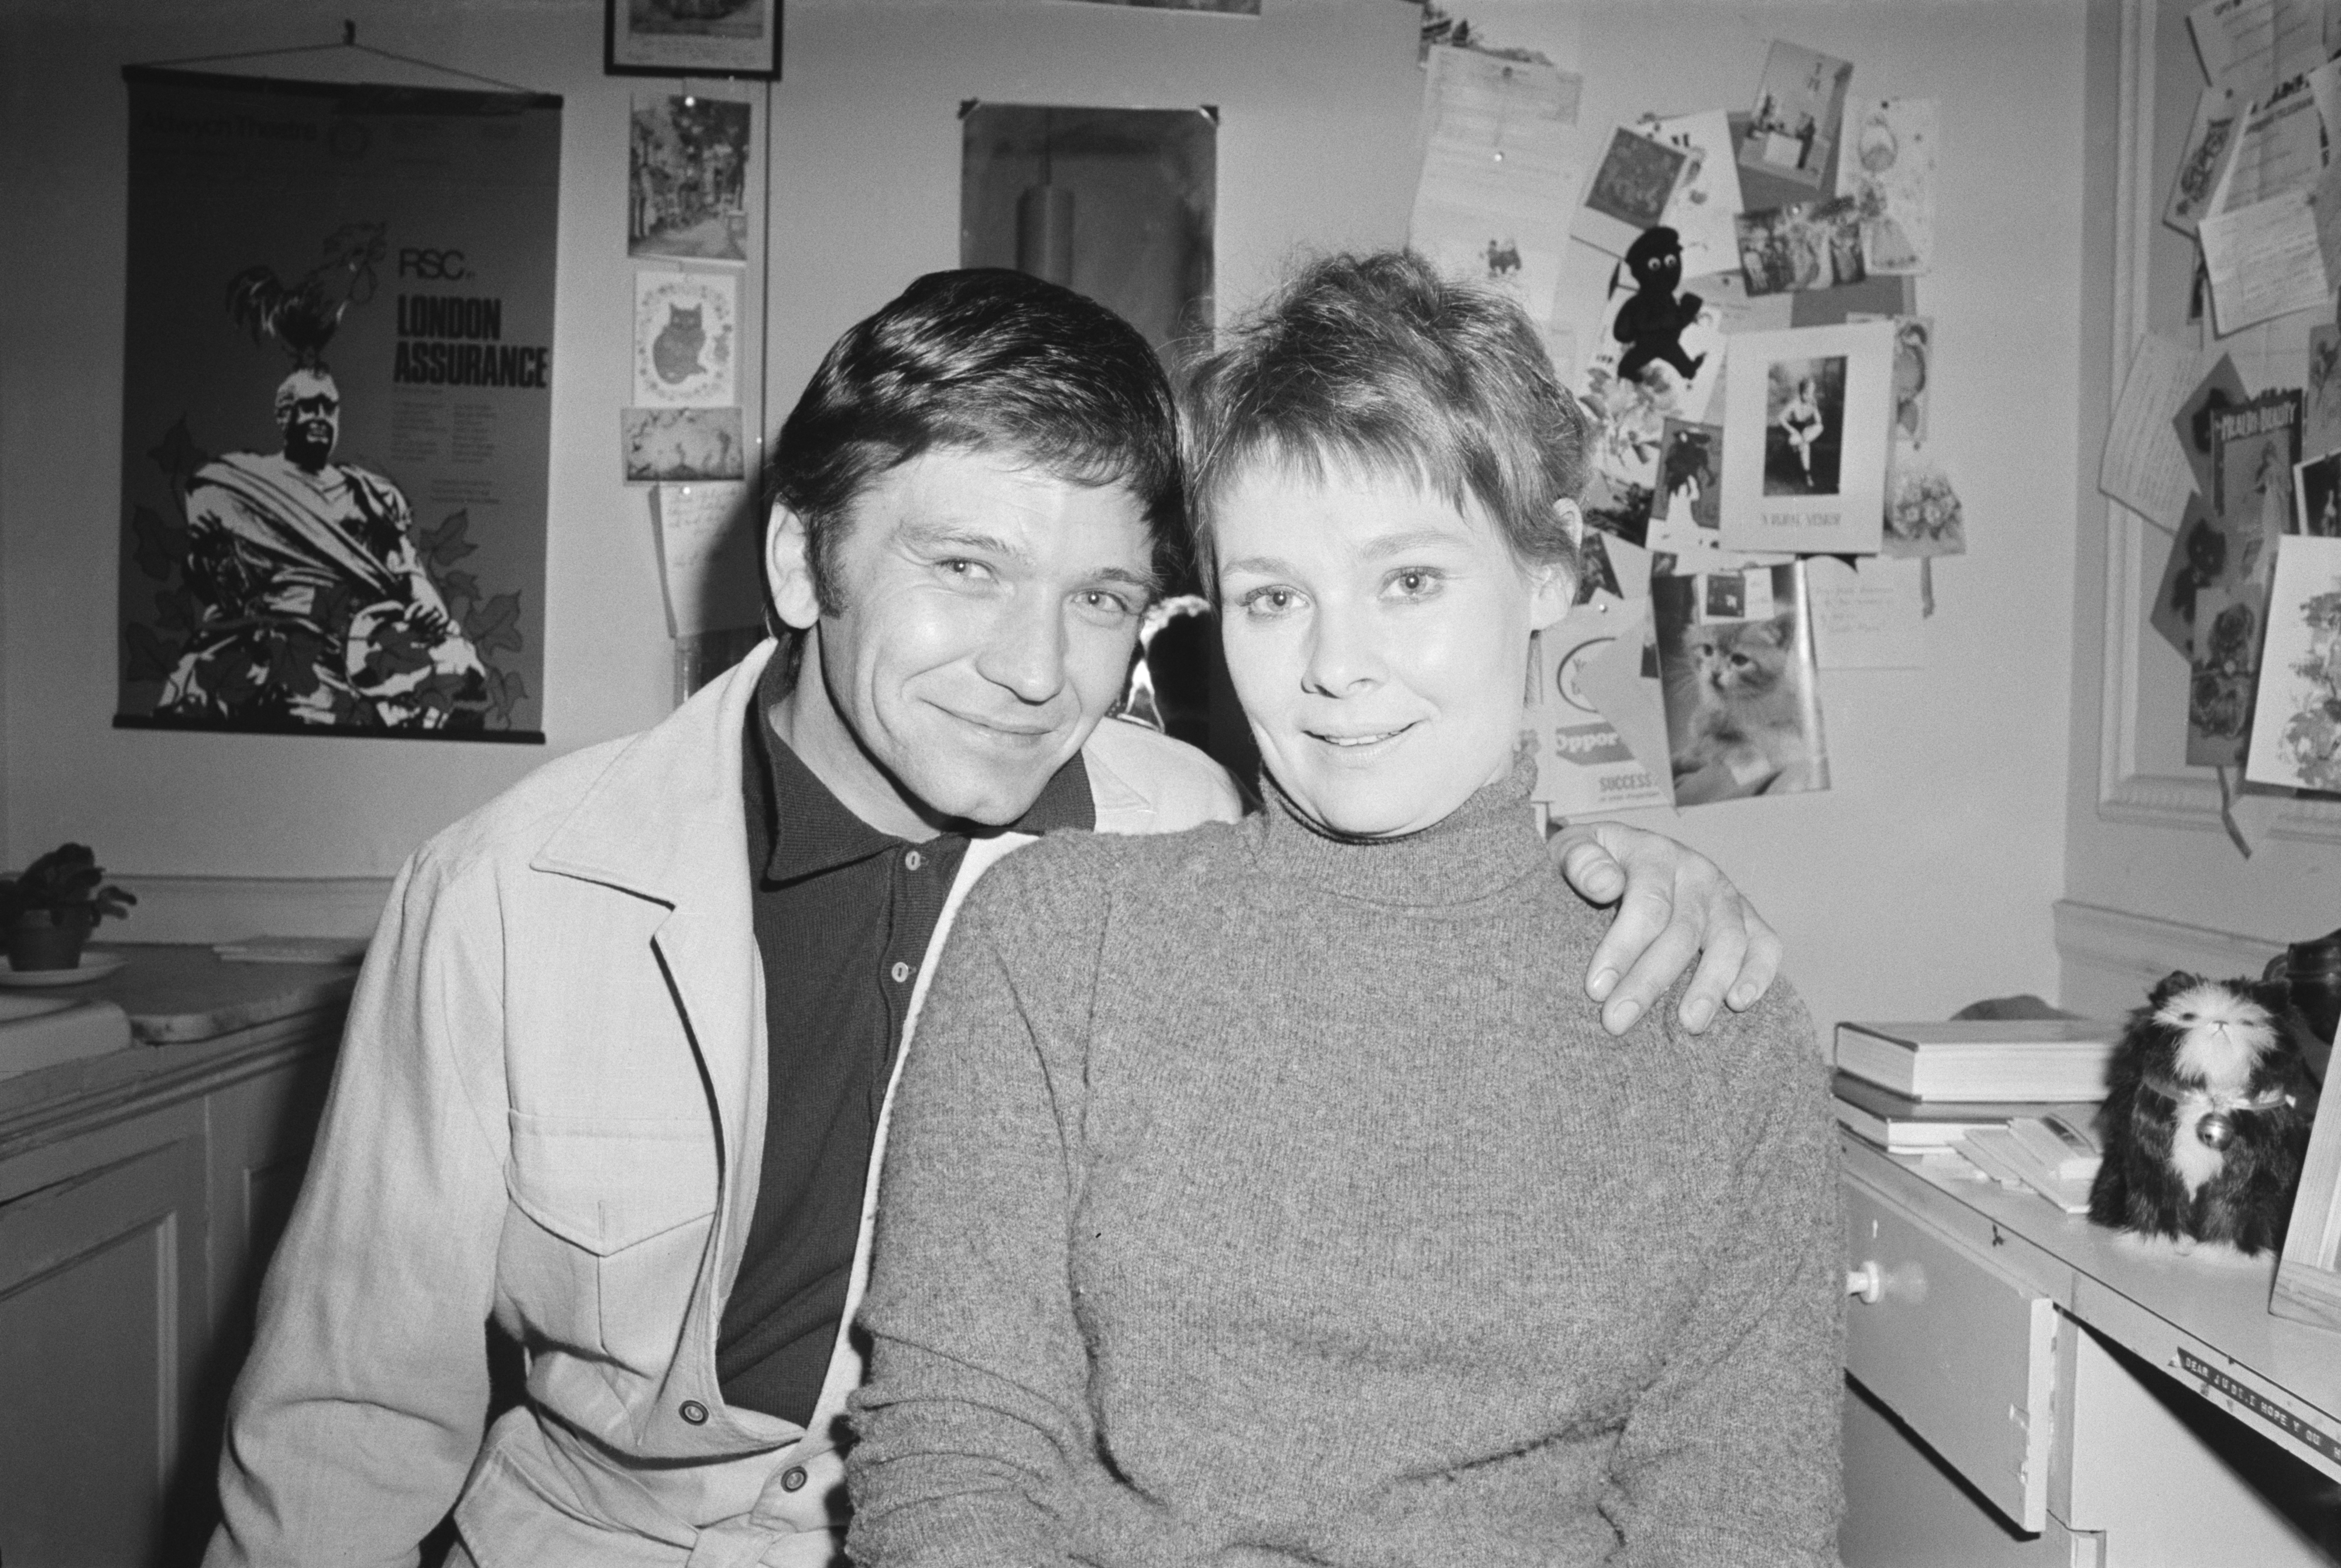 Judi in a high-neck sweater sitting with actor Michael Williams